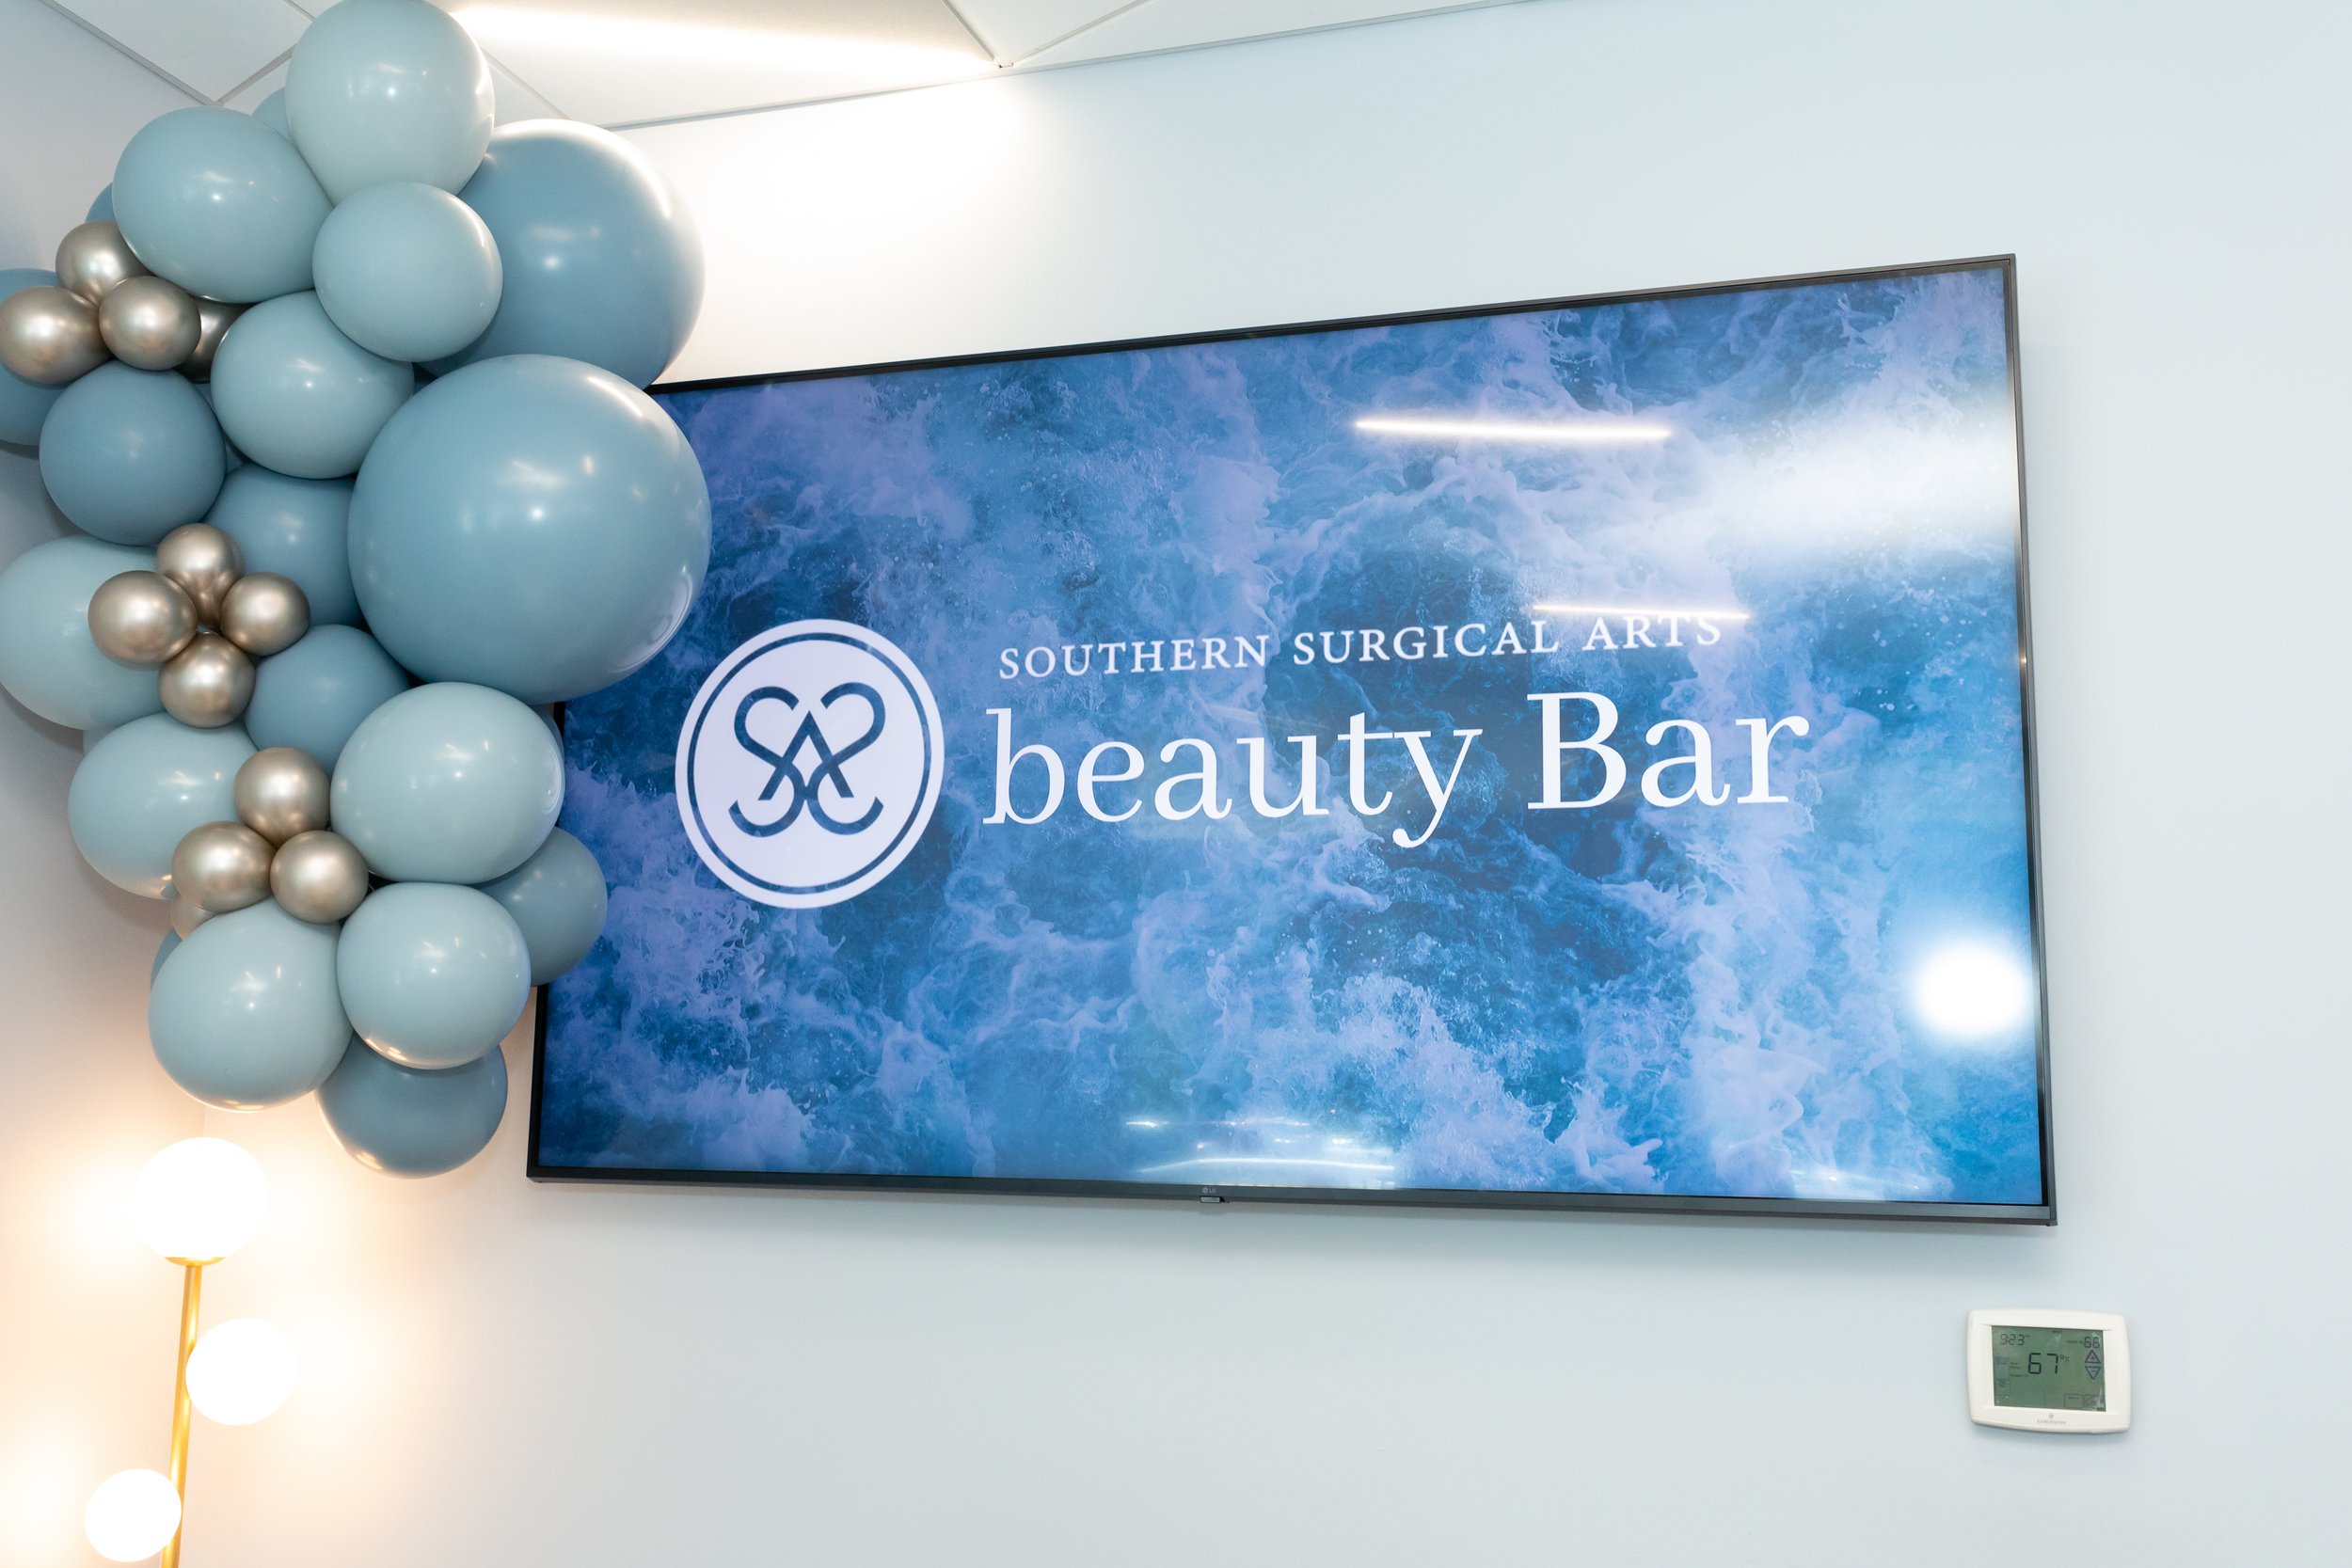 20230817-The Luxe List Atlanta-Southern Surgical Arts Beauty Bar Grand Opening-THU-BC-006.jpg (Copy)